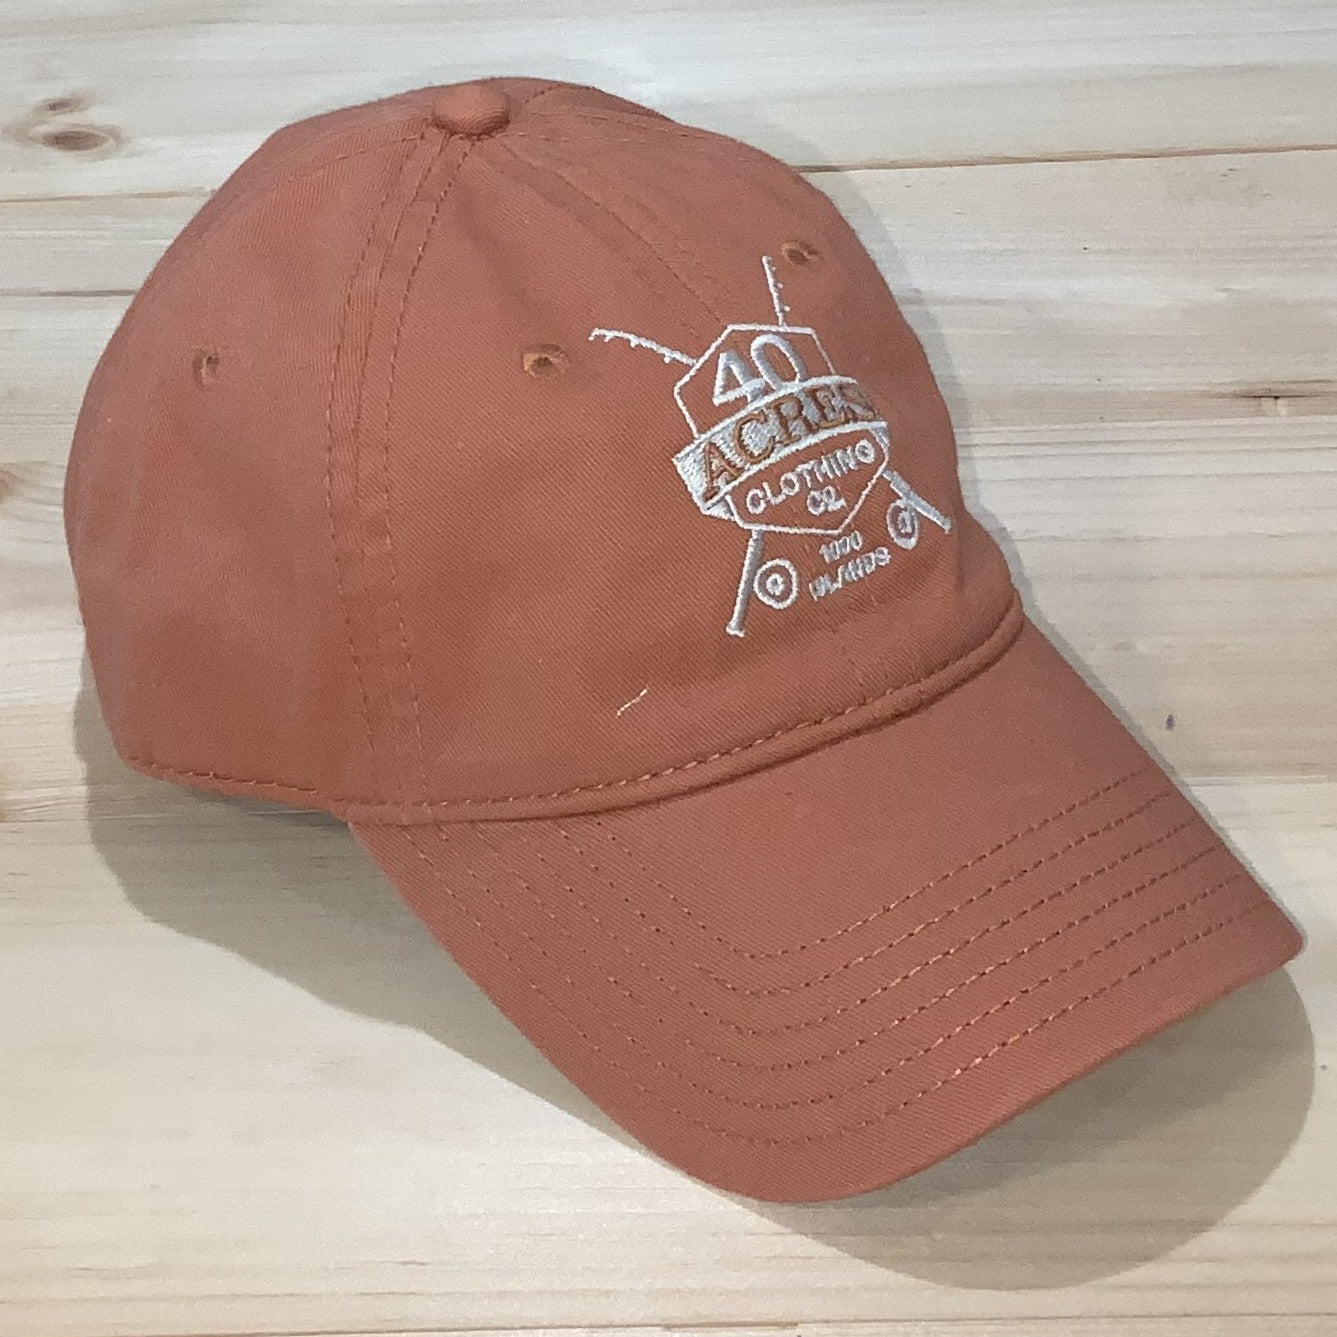 BASS ROCK Hat – 1000 Islands 40 Acres Clothing Co.